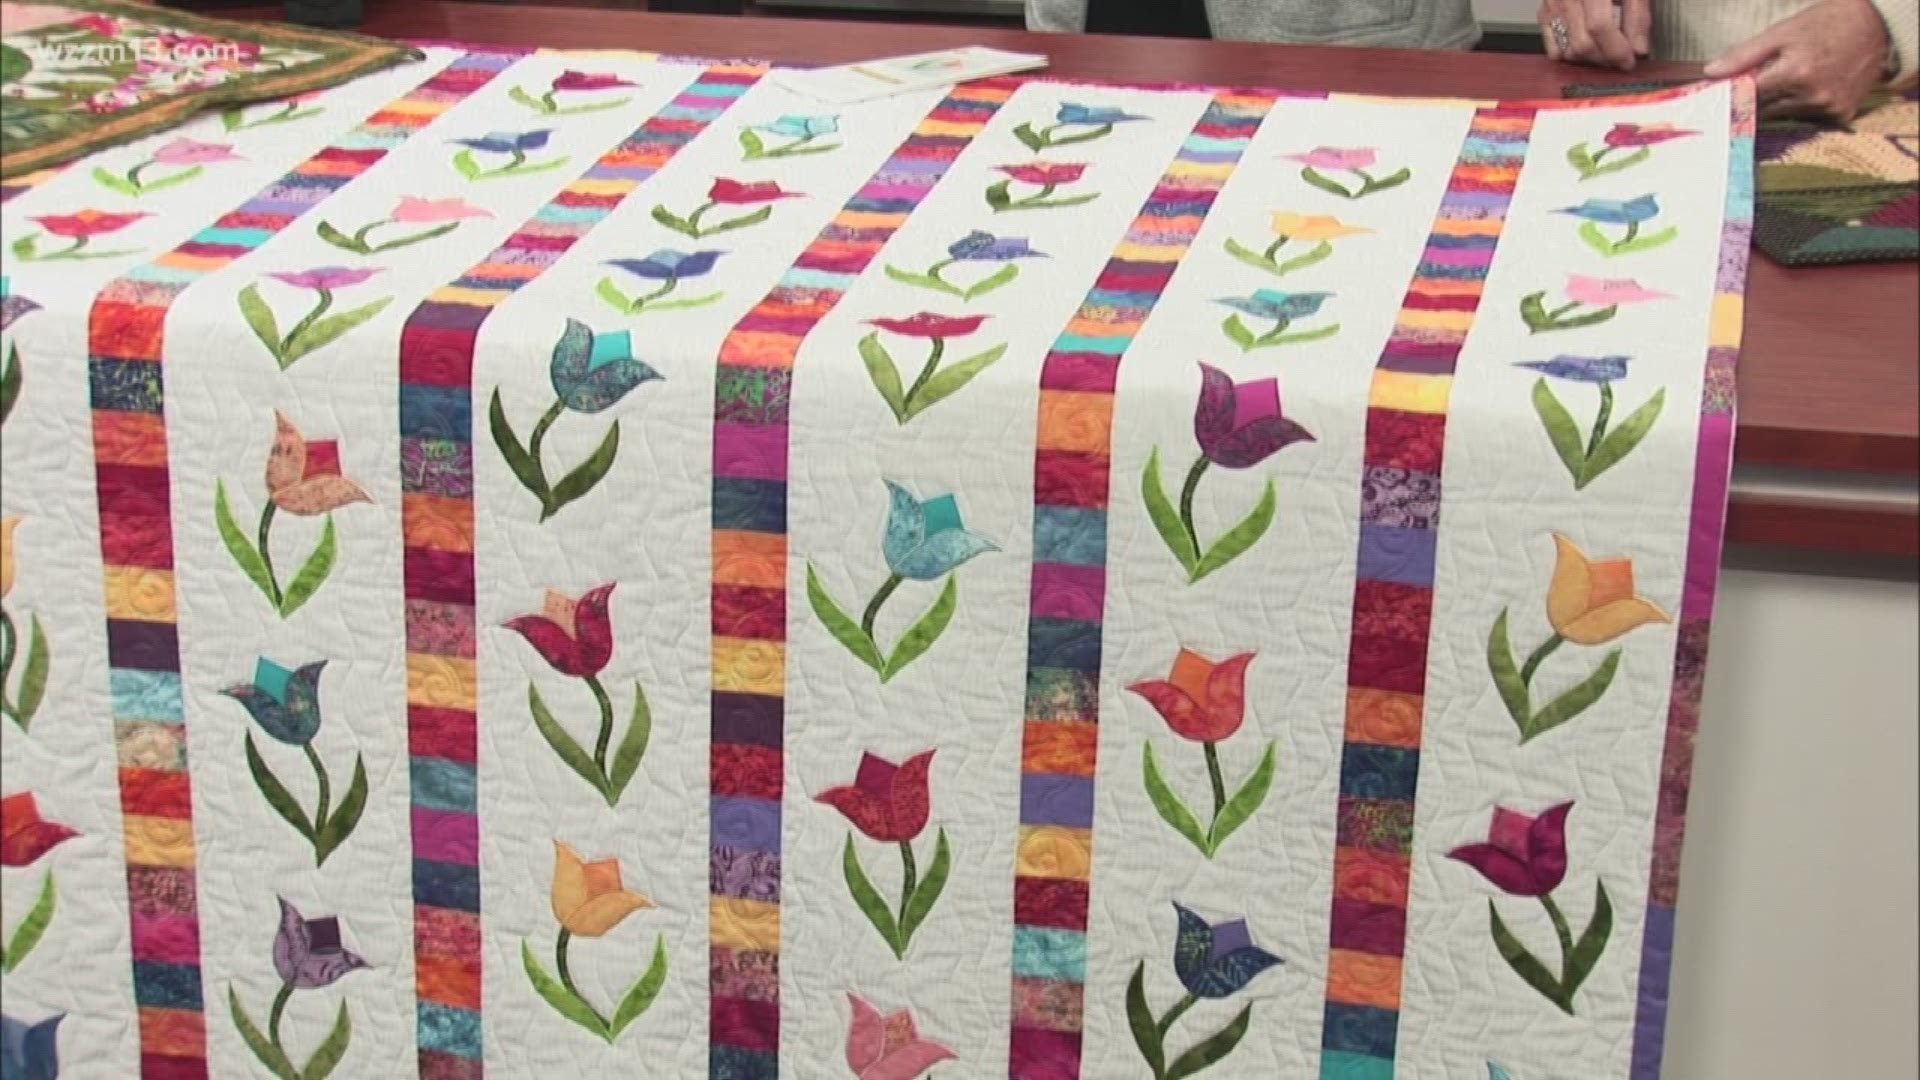 The Tulip Time Festival has announced their plans for the 2019 Tulip Time Quilt Show! The Quilt Show shows off over 100 different beautiful, hand-made quilts created by artists from the area.